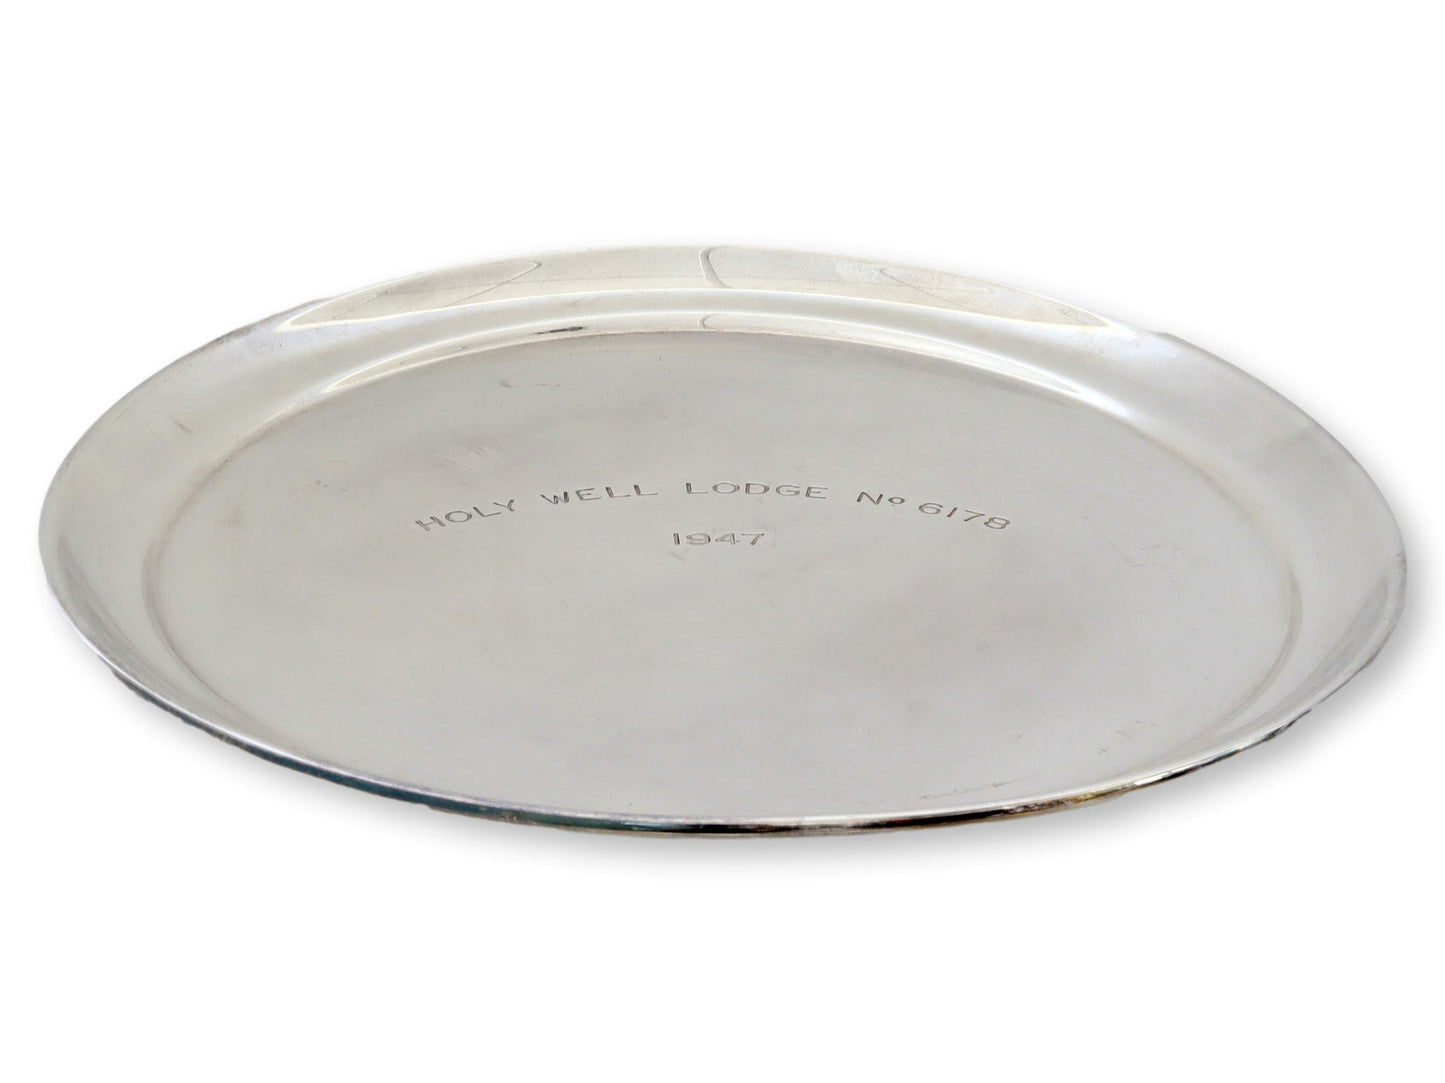 1947 English Lodge Drink Serving Tray